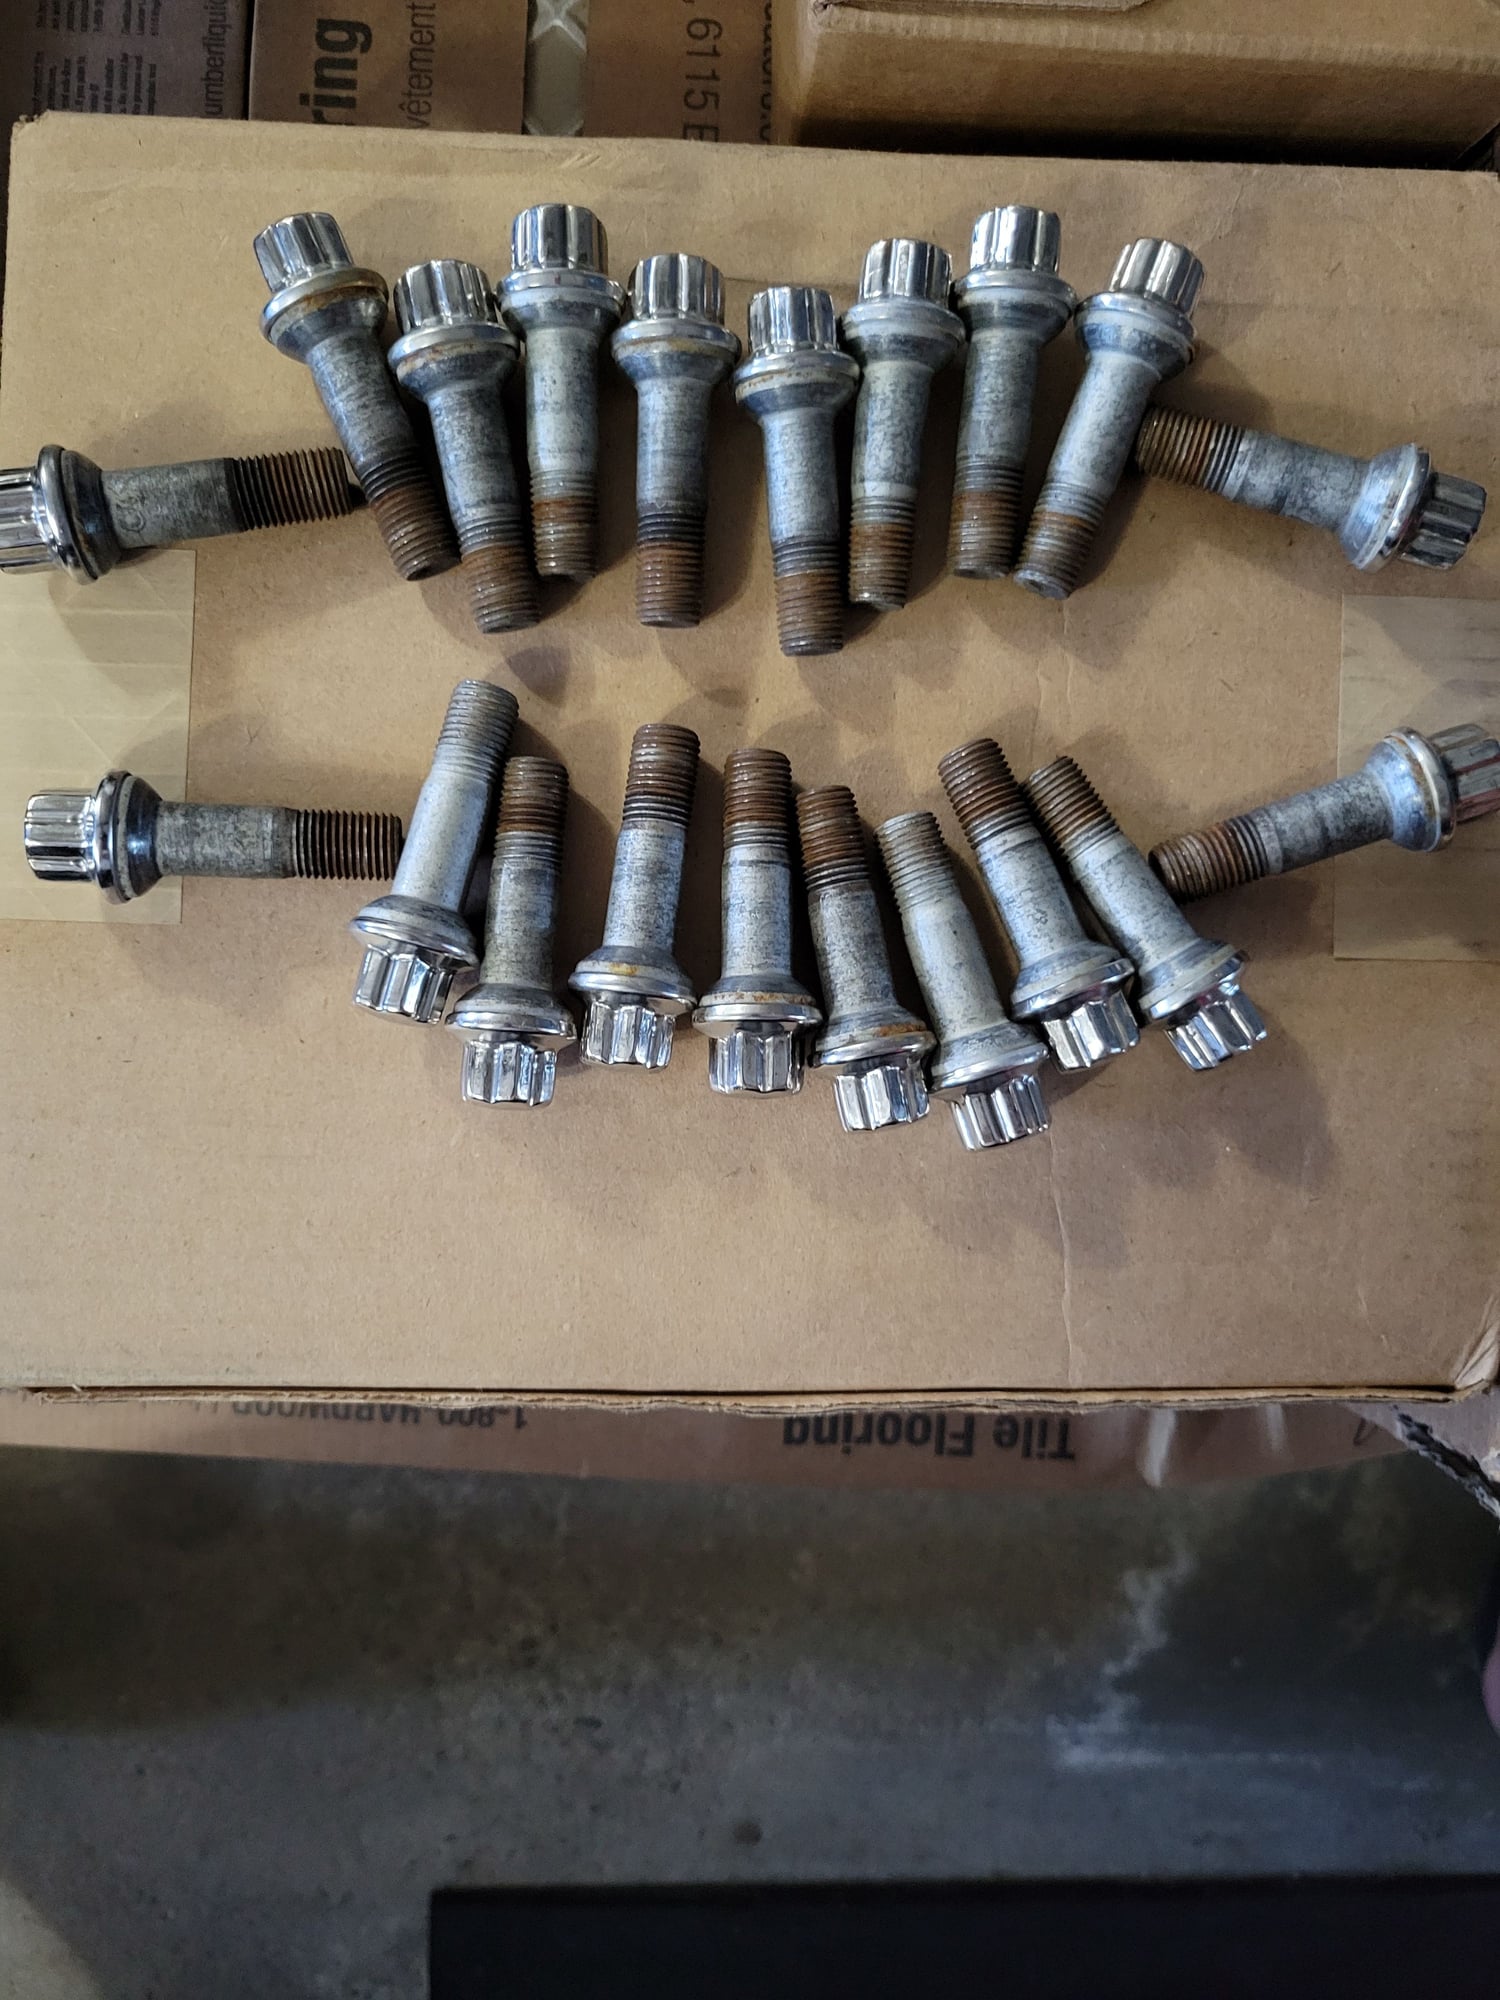 Wheels and Tires/Axles - 07-13 W221 MERCEDES S550 S600 S63 WHEEL LUG NUTS BOLTS 000-990-54-07 - Used - All Years Mercedes-Benz All Models - Waterbury, CT 06708, United States